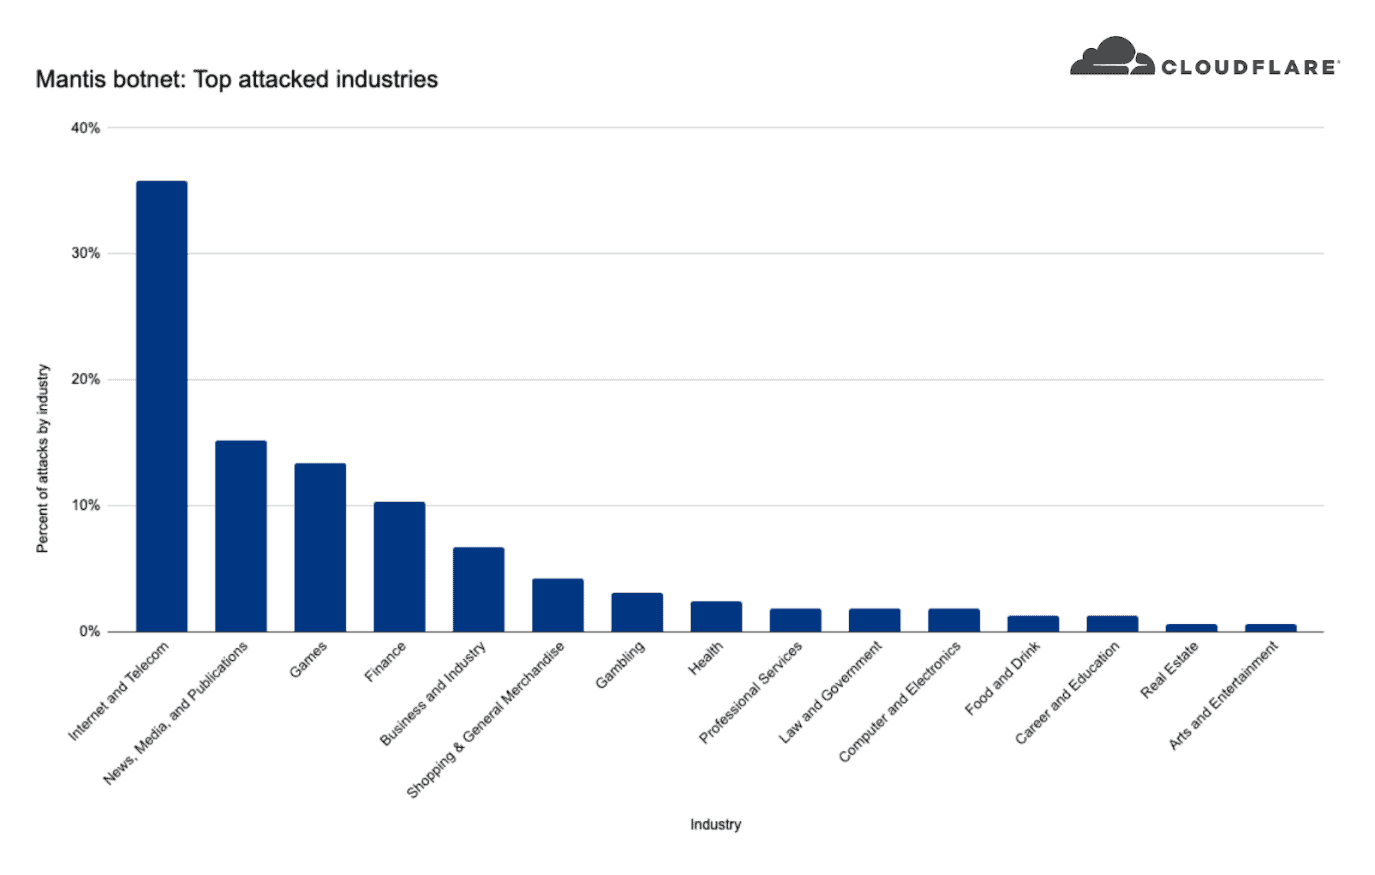 Top industries attacked by Mantis botnet